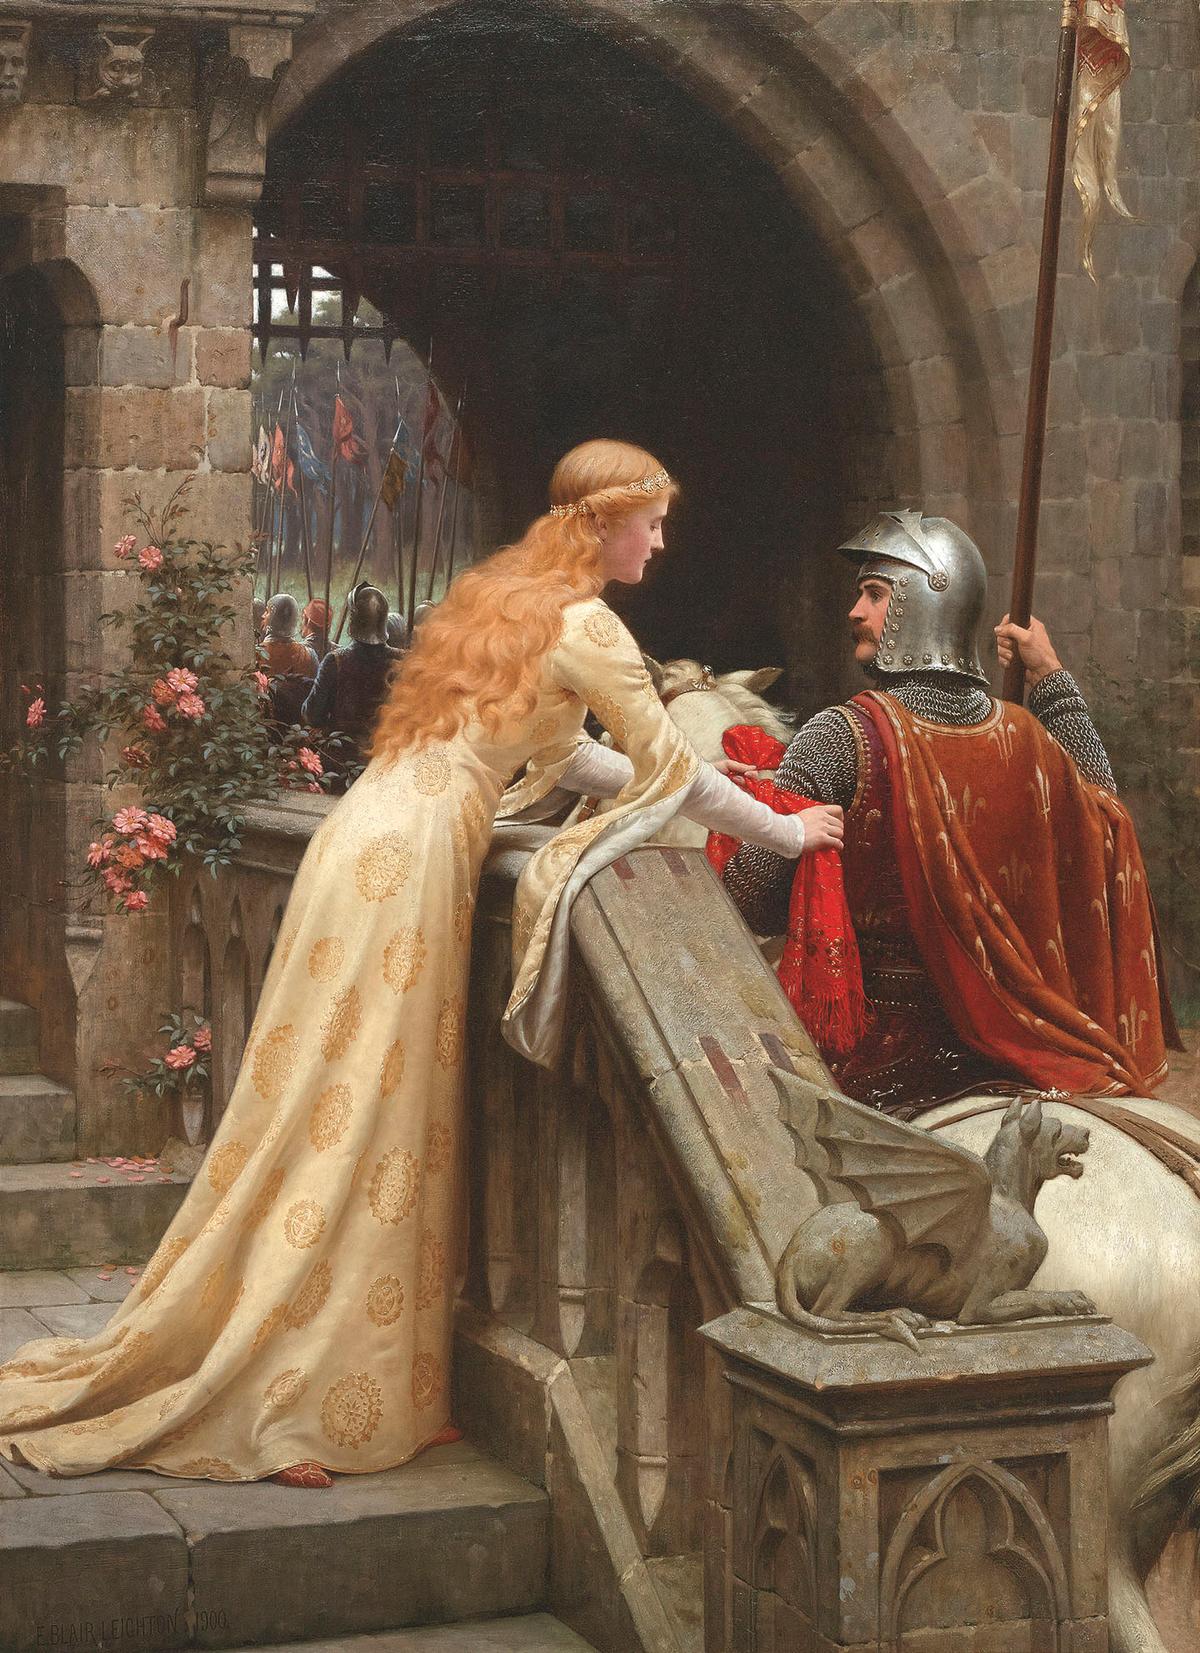 "God Speed," 1900, by Edmund Blair Leighton. Oil on canvas; 63 inches by 45 5/8 inches. Private collection. (Public Domain)